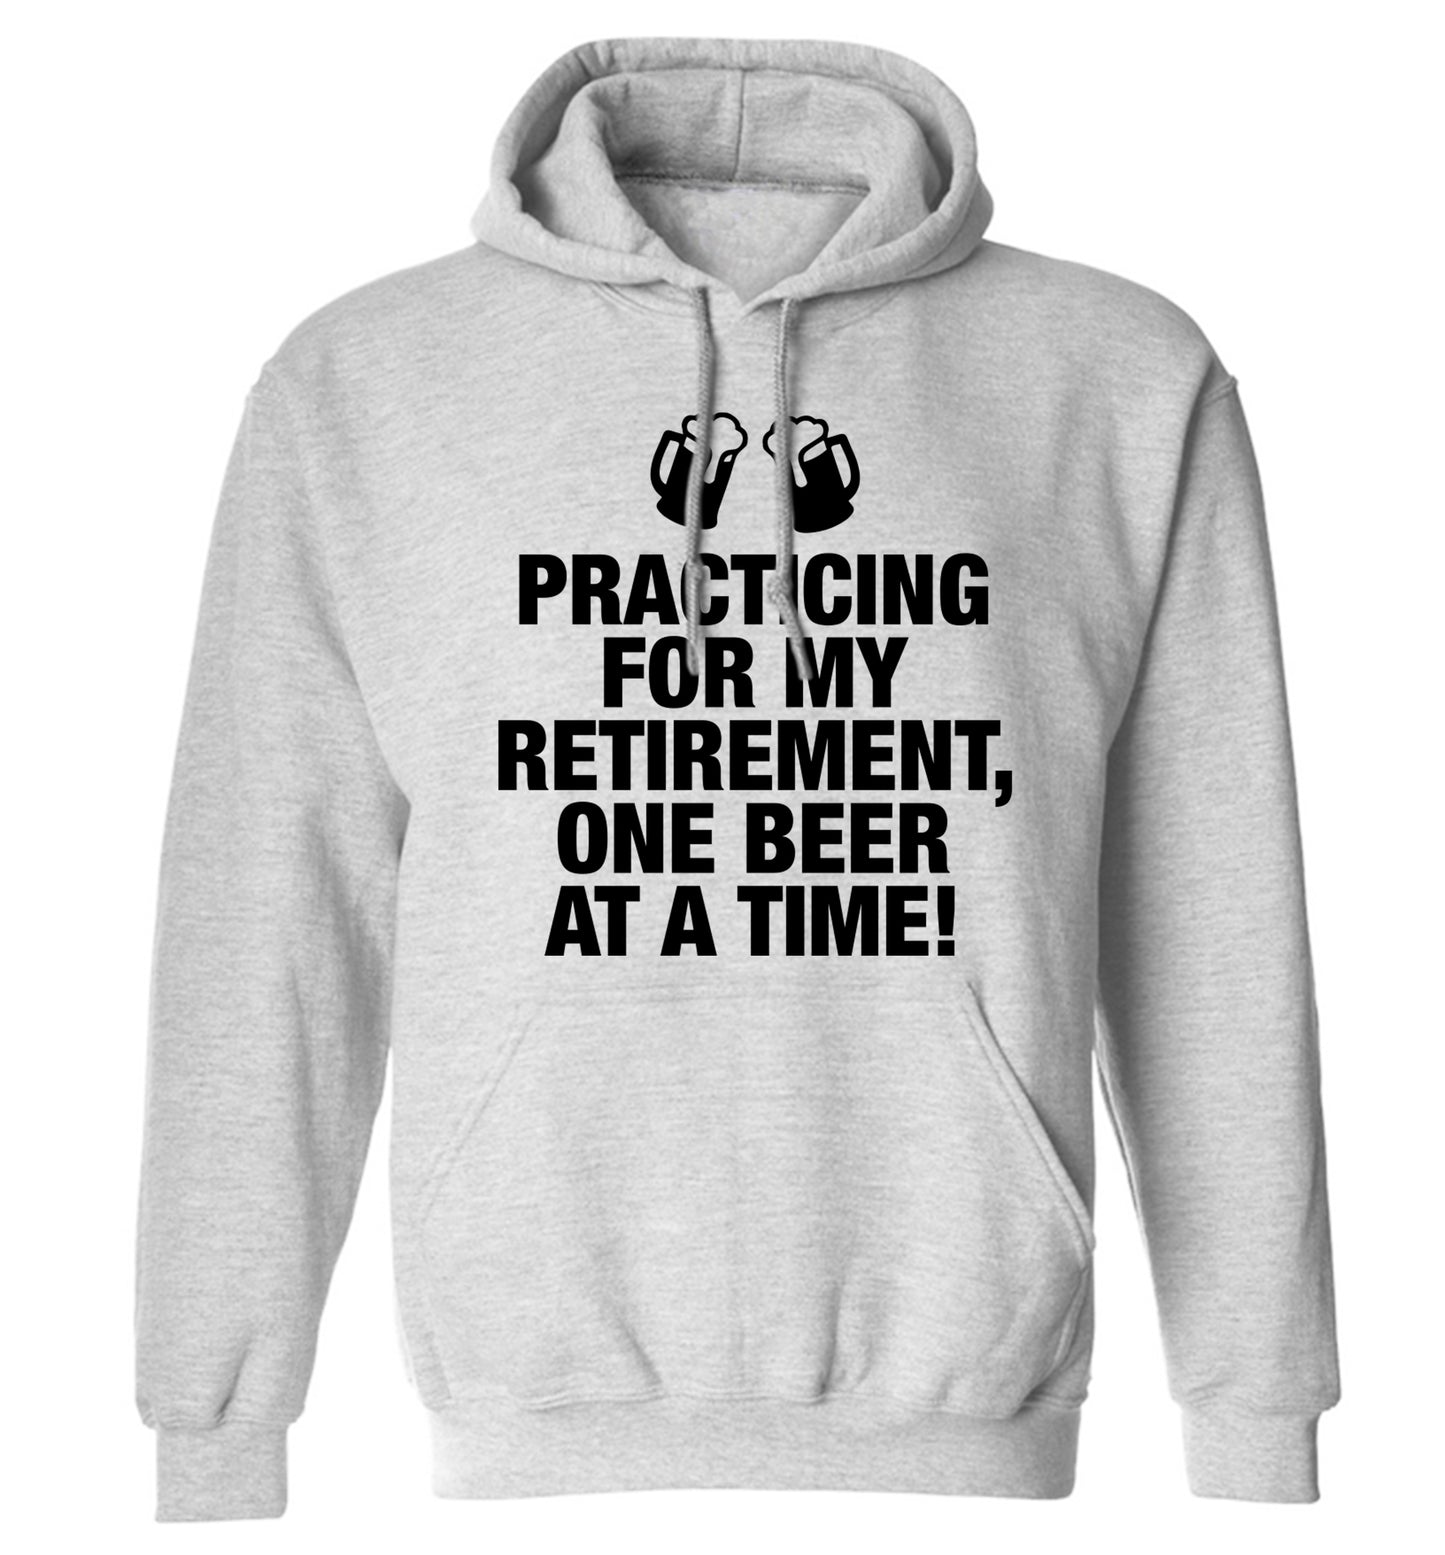 Practicing my retirement one beer at a time adults unisex grey hoodie 2XL